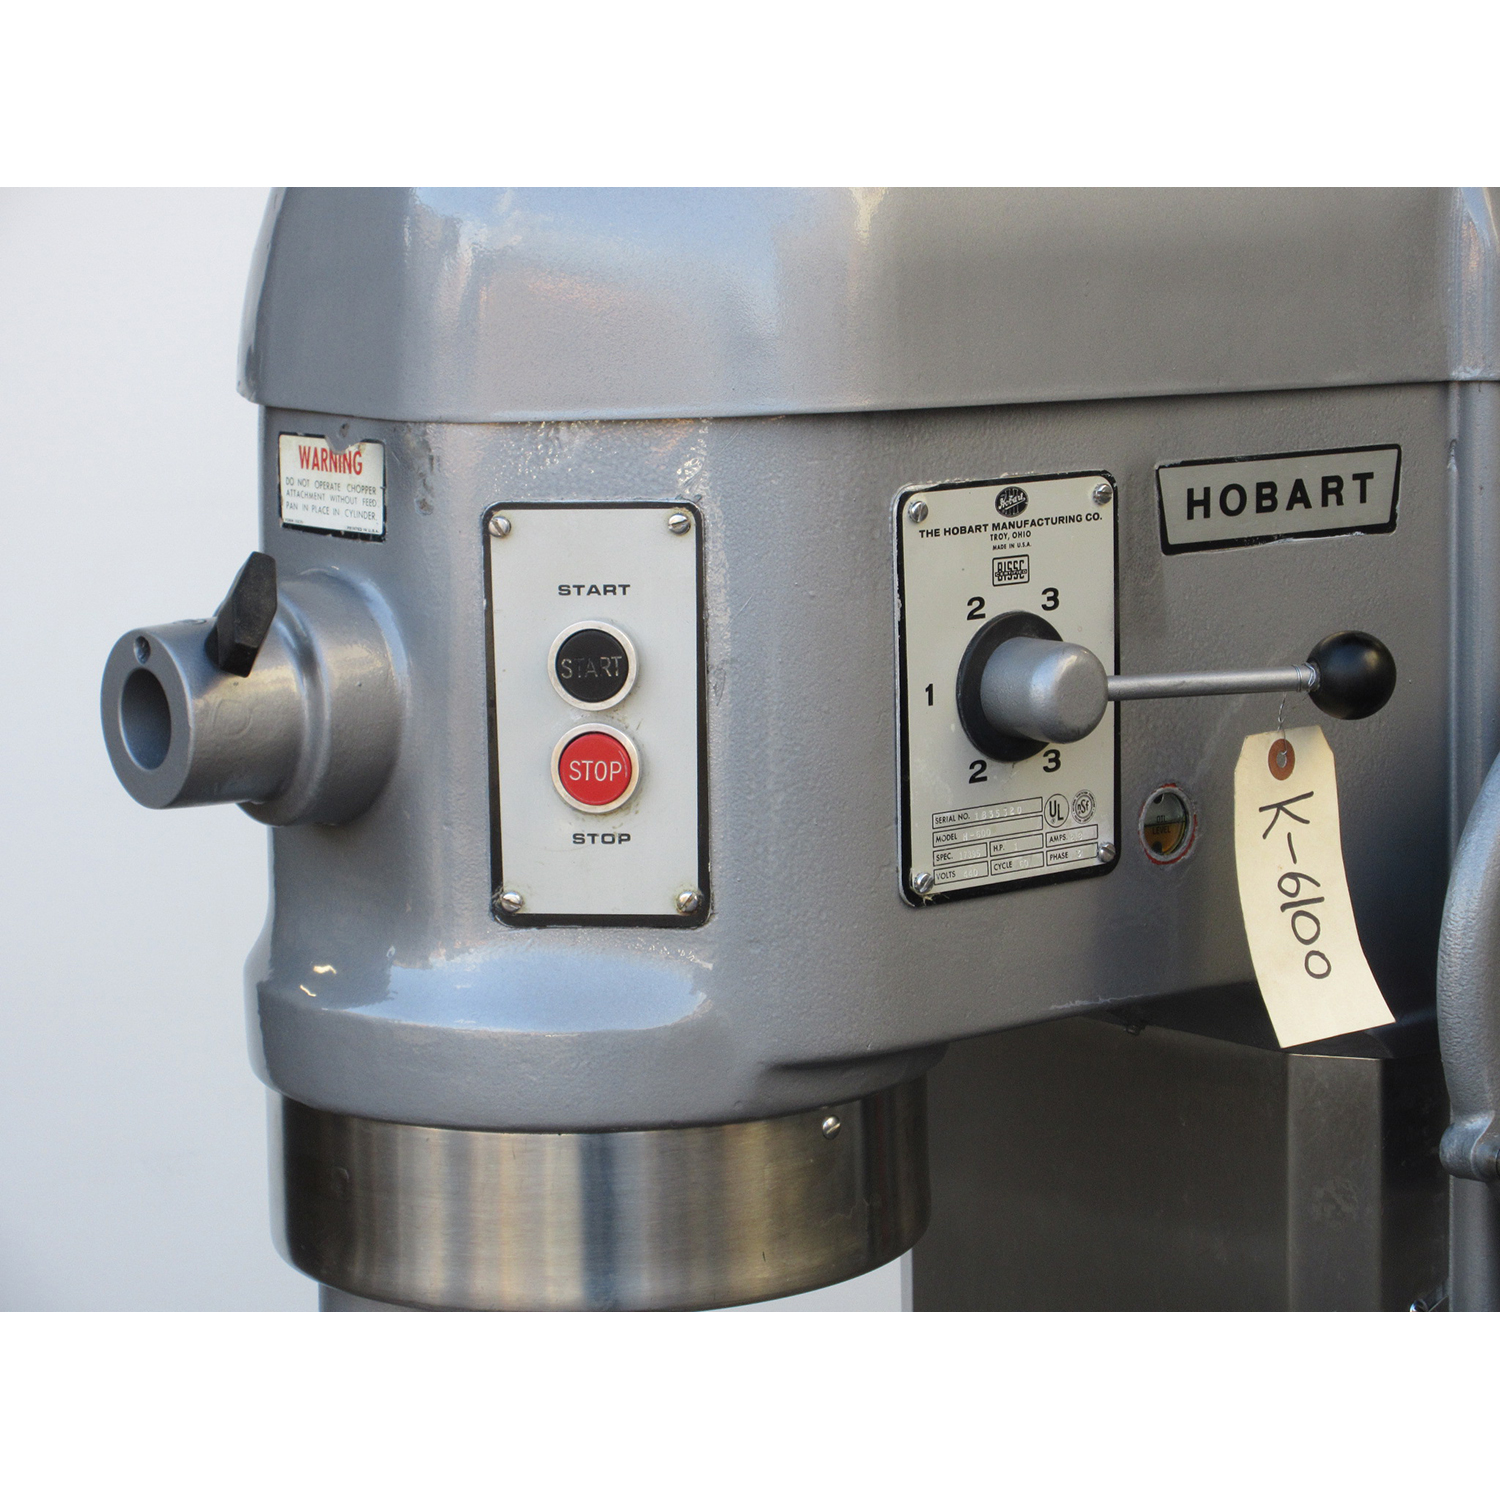 Hobart H600 Mixer 60 Qt, Used Excellent Condition image 1